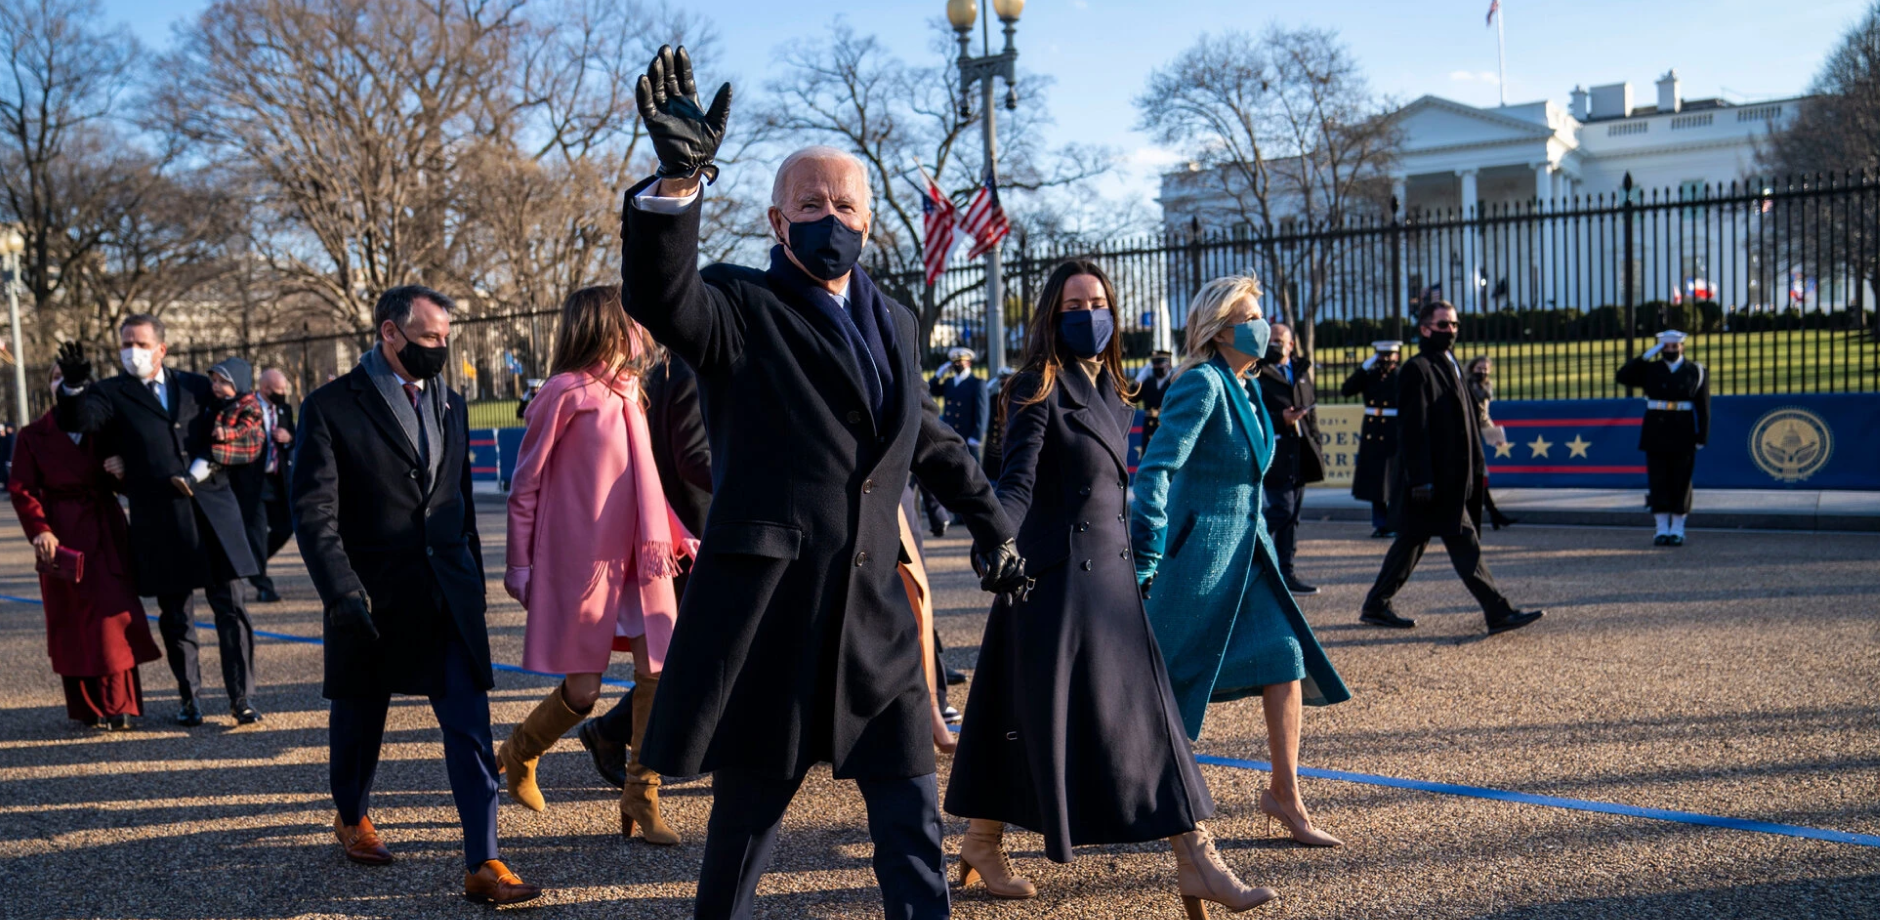 President Biden in a group waving while walking outside the White House